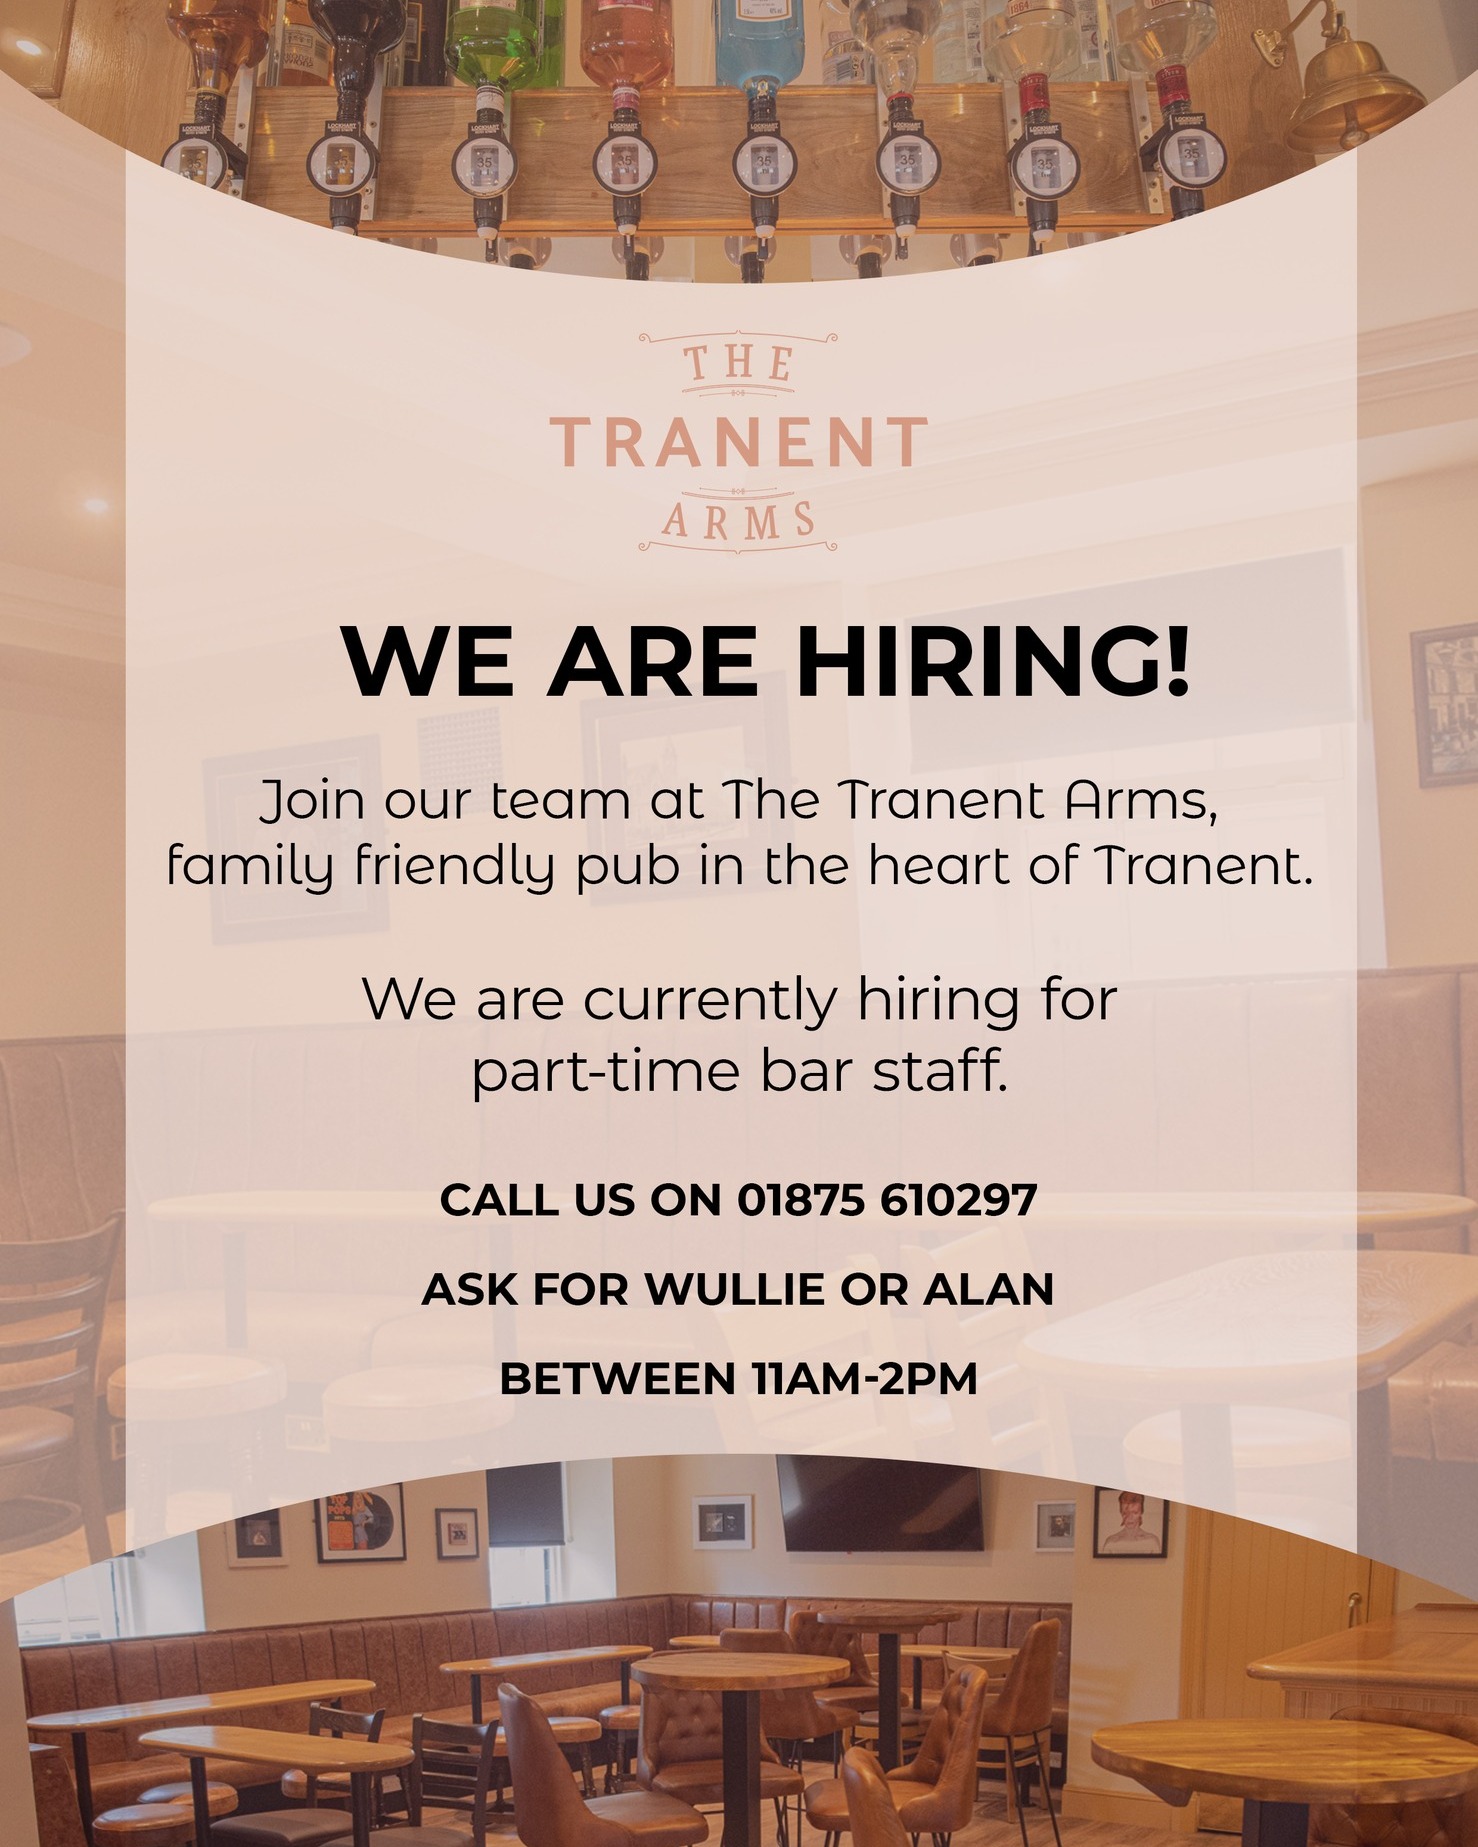 The Tranent Arms